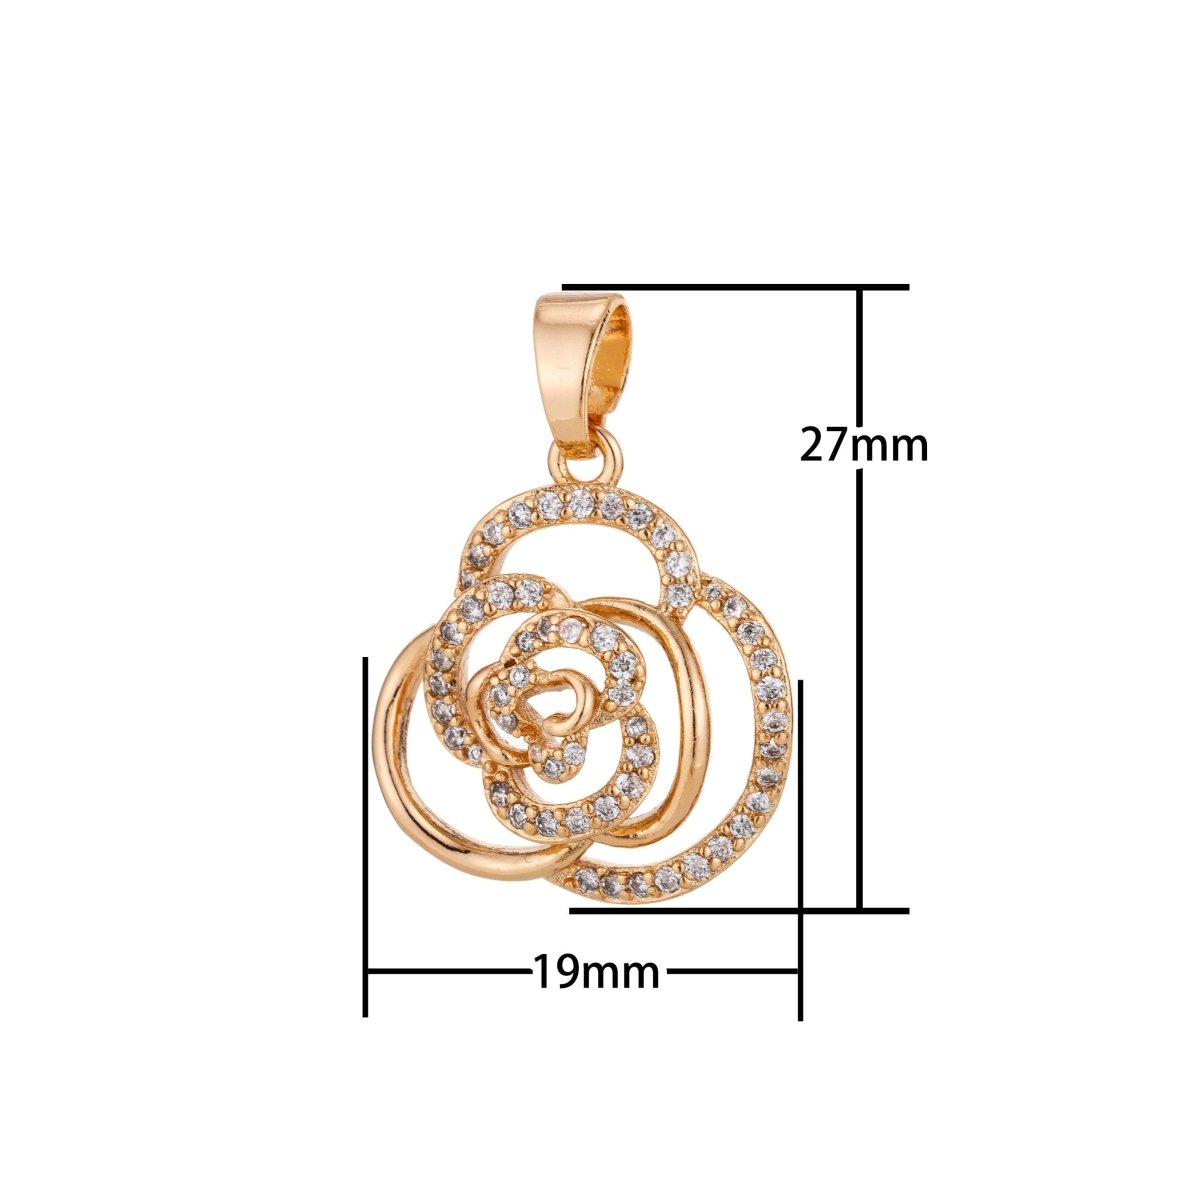 Dainty 18K Gold Filled or Rose Gold Rose Flower Charm Pendant w/ Bails Floral Cubic Zirconia Necklace for Jewelry Making H-801 - DLUXCA